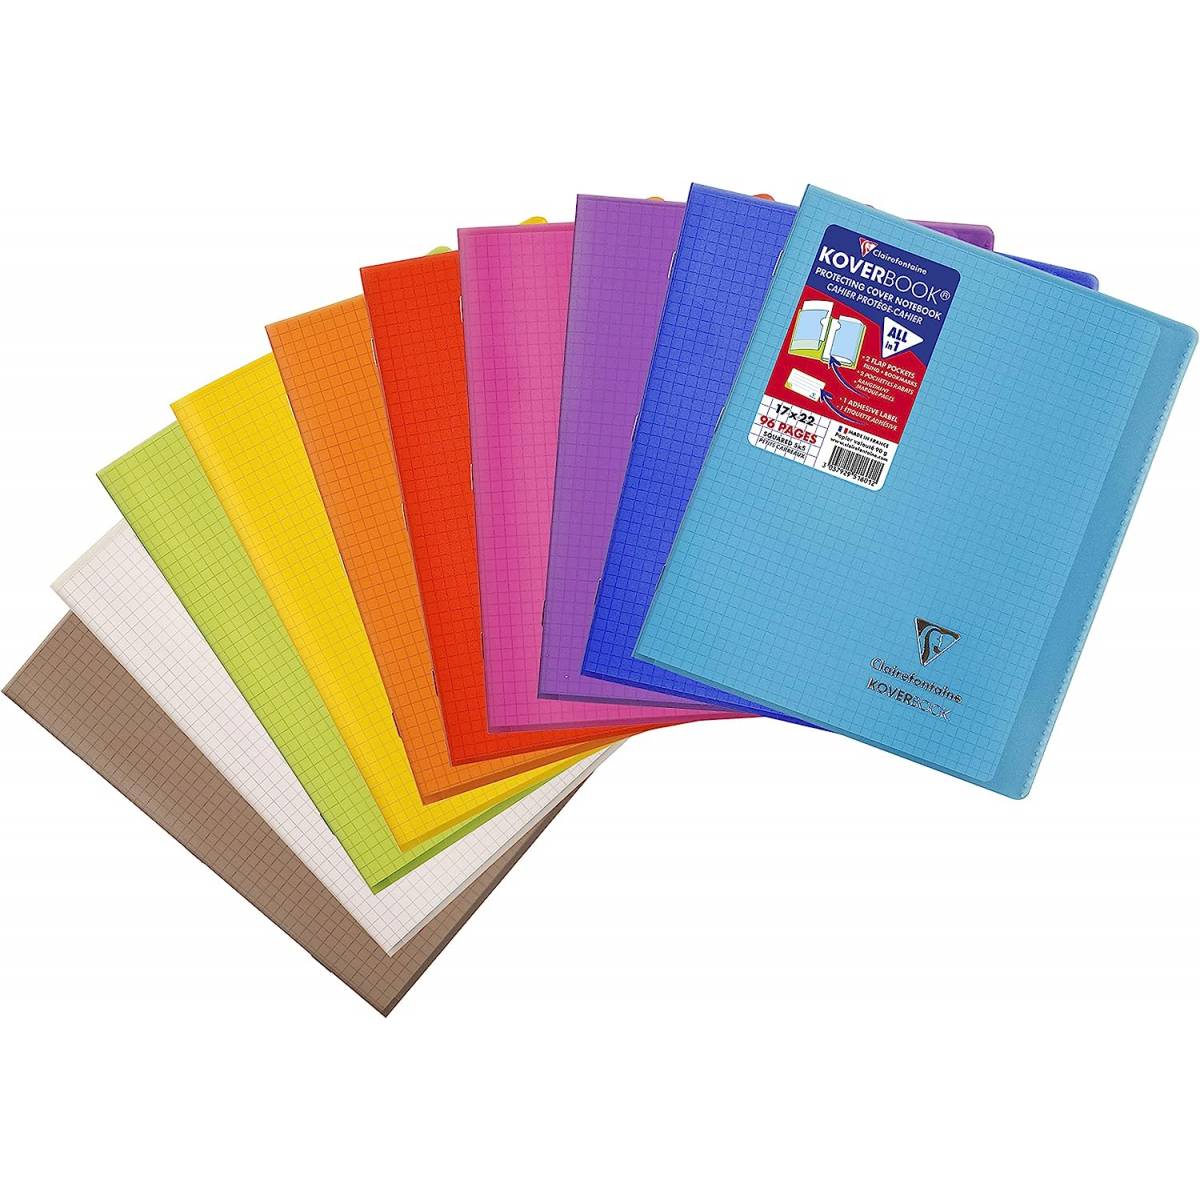 Cahier koverbook 96 pages seyes 17x22 cm - rouge